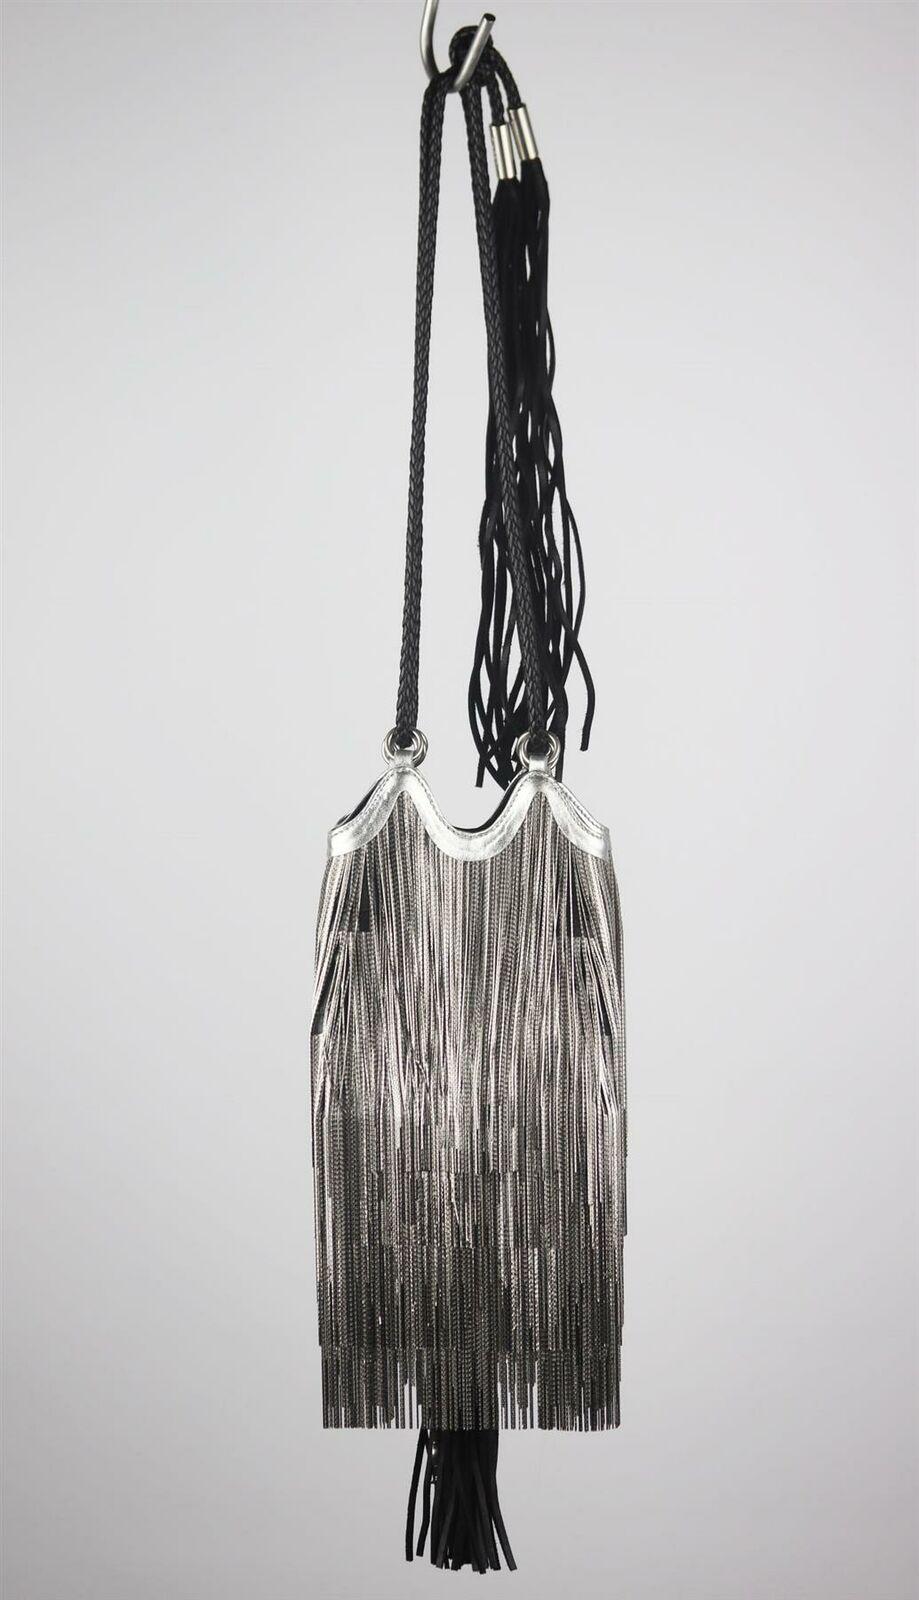 We're obsessed with bucket bags right now, and the 'Mansour' from Saint Laurent is at the top of our wish list, the small style is coloured in a chic metallic silver and black shade and features chain fringing all around that's perfectly in touch